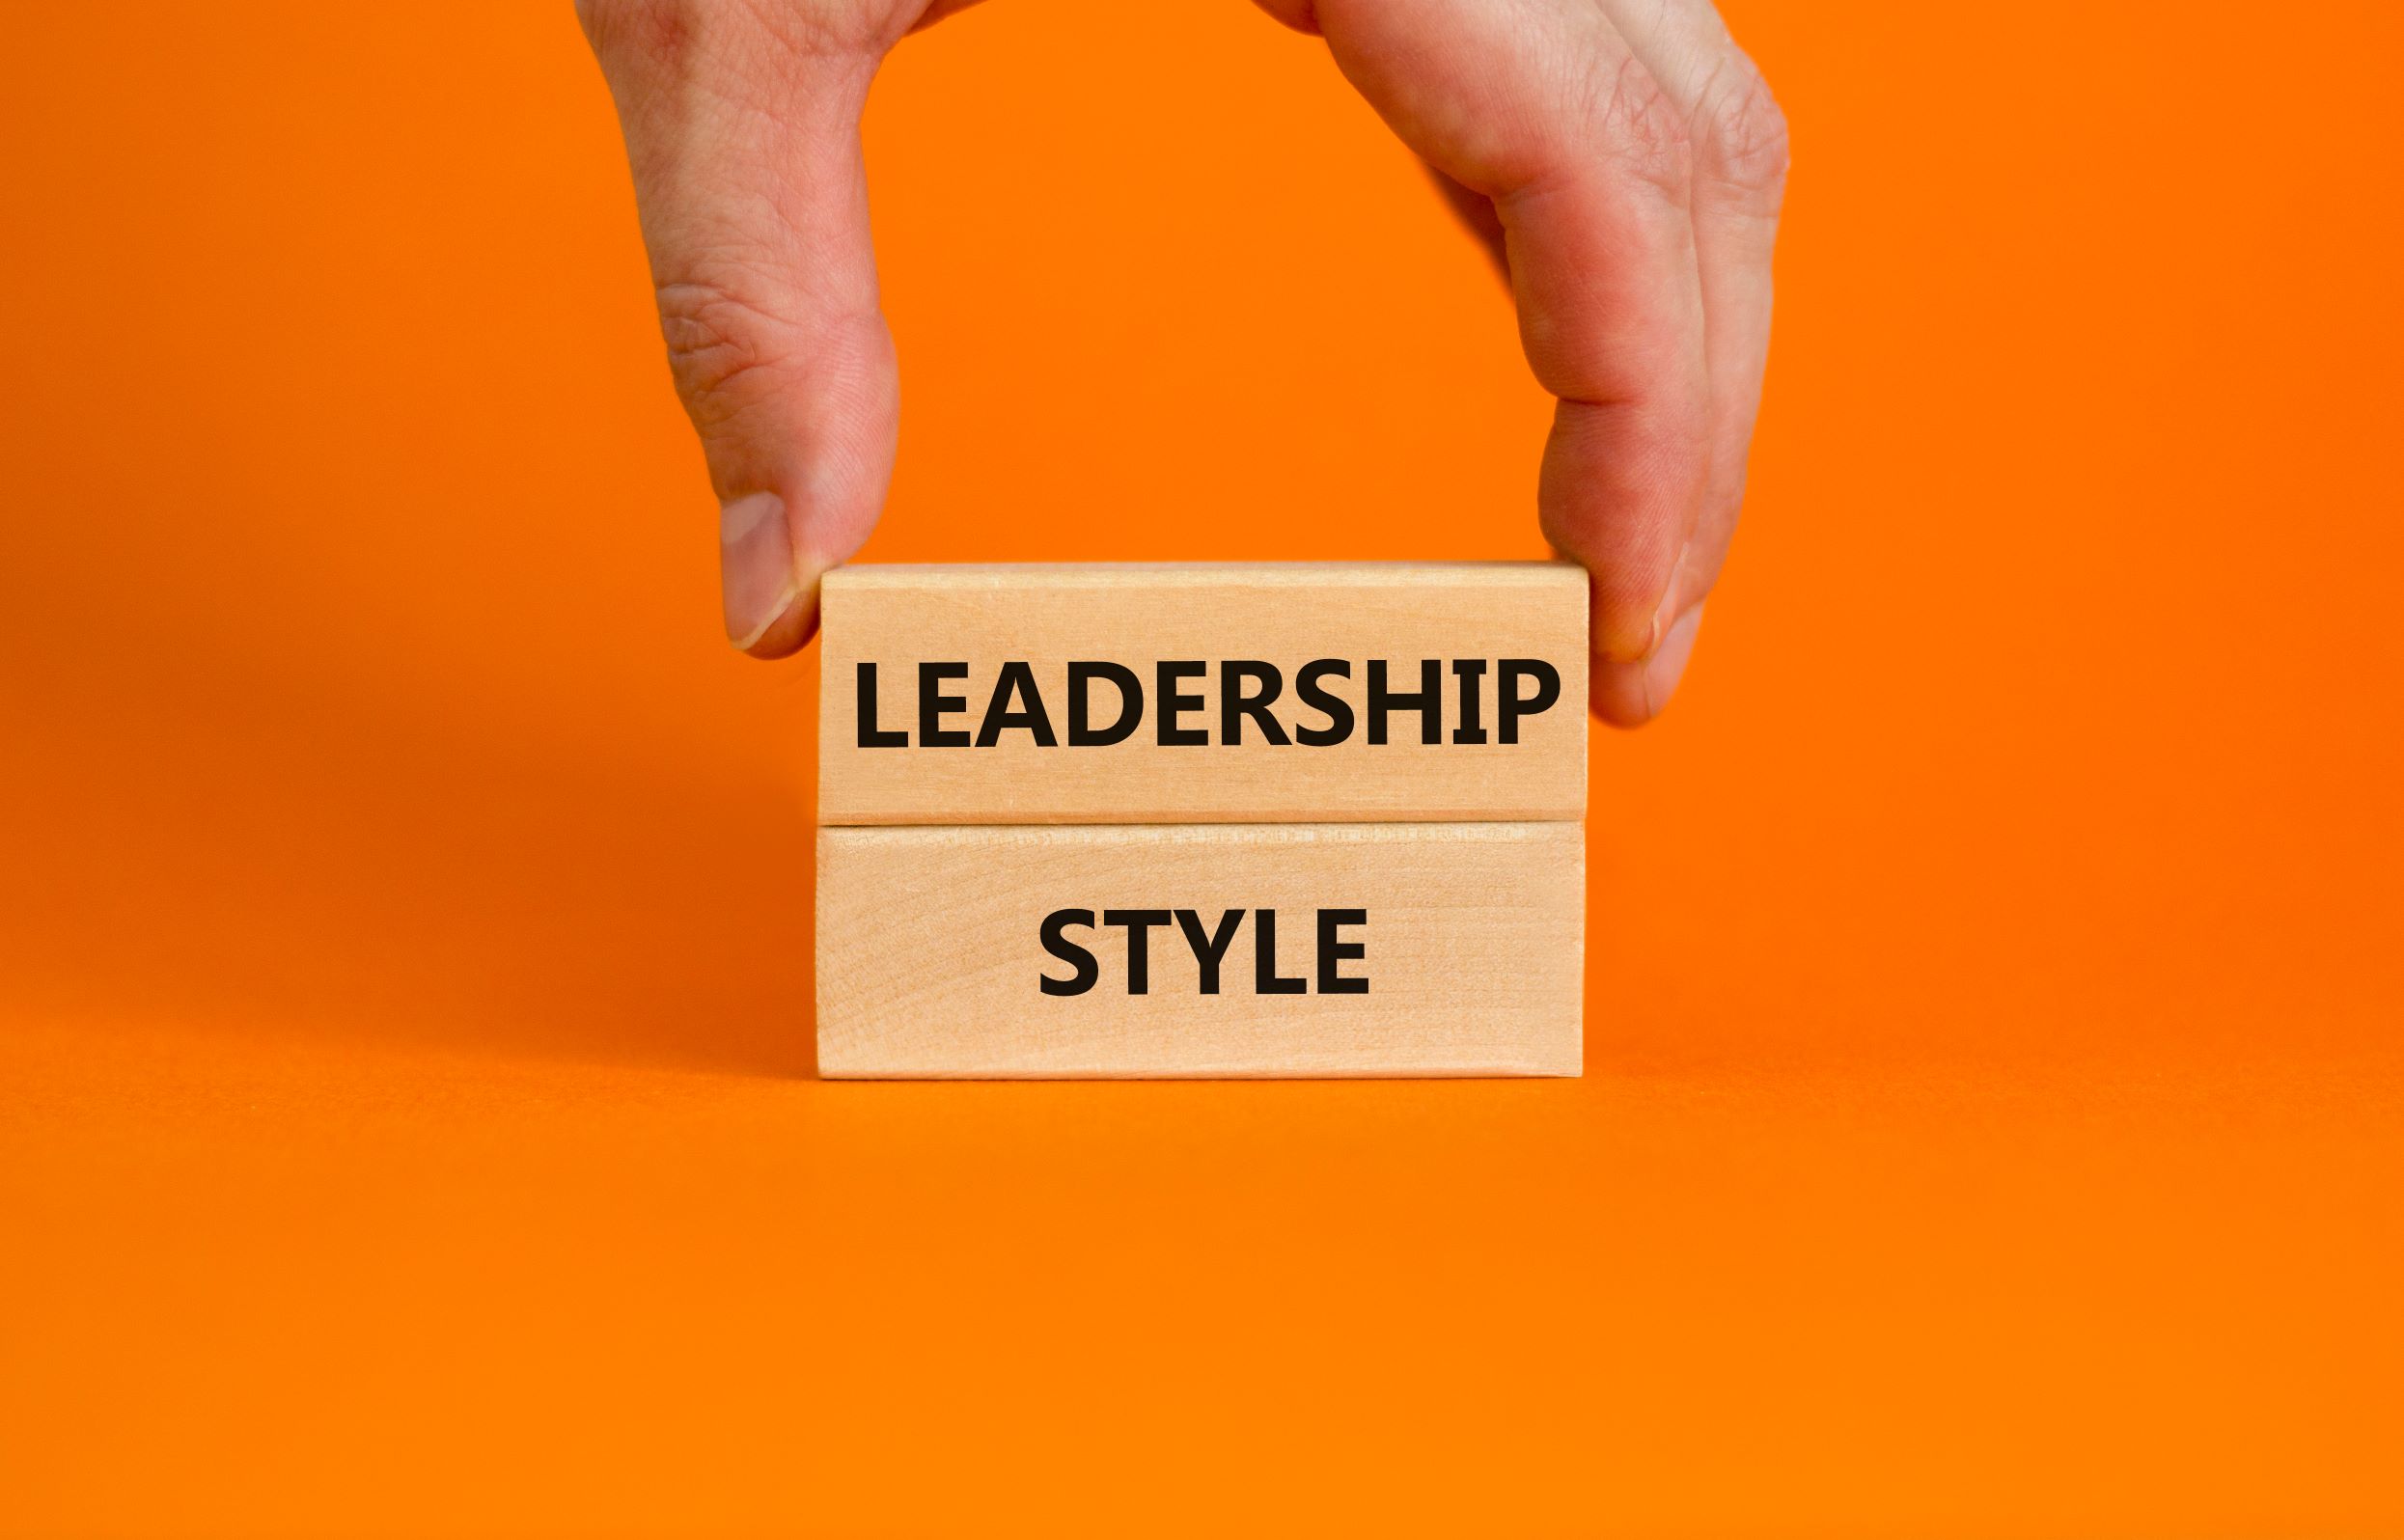 What is a leadership style?